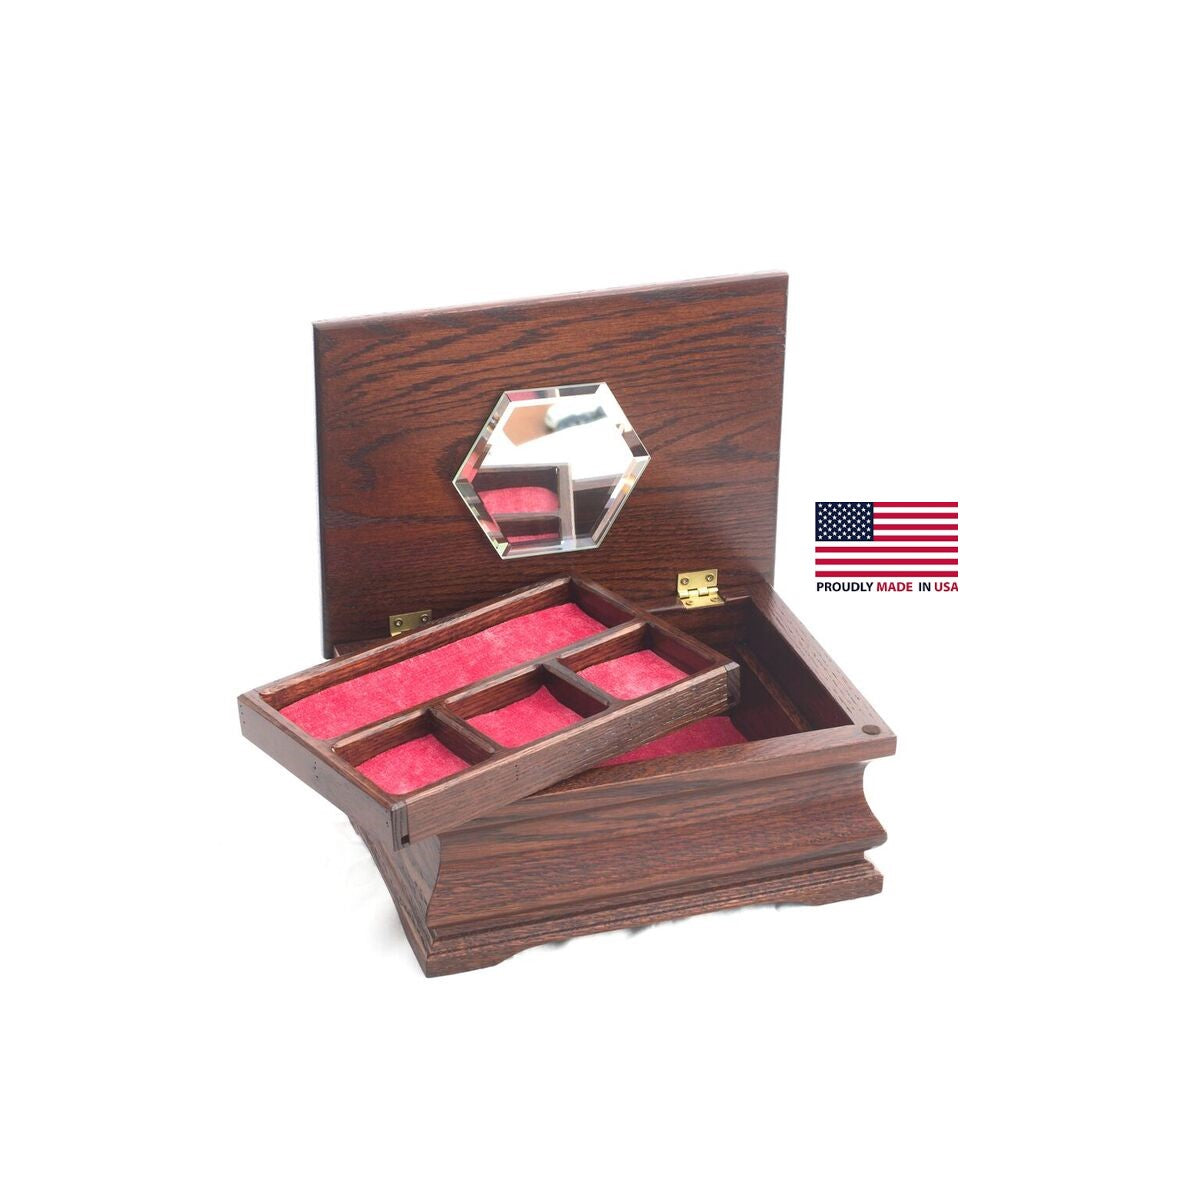 American Chest Little Lady Jewelry Box w/ Lift Out Tray and Mirror, Hand Crafted Wooden Chest